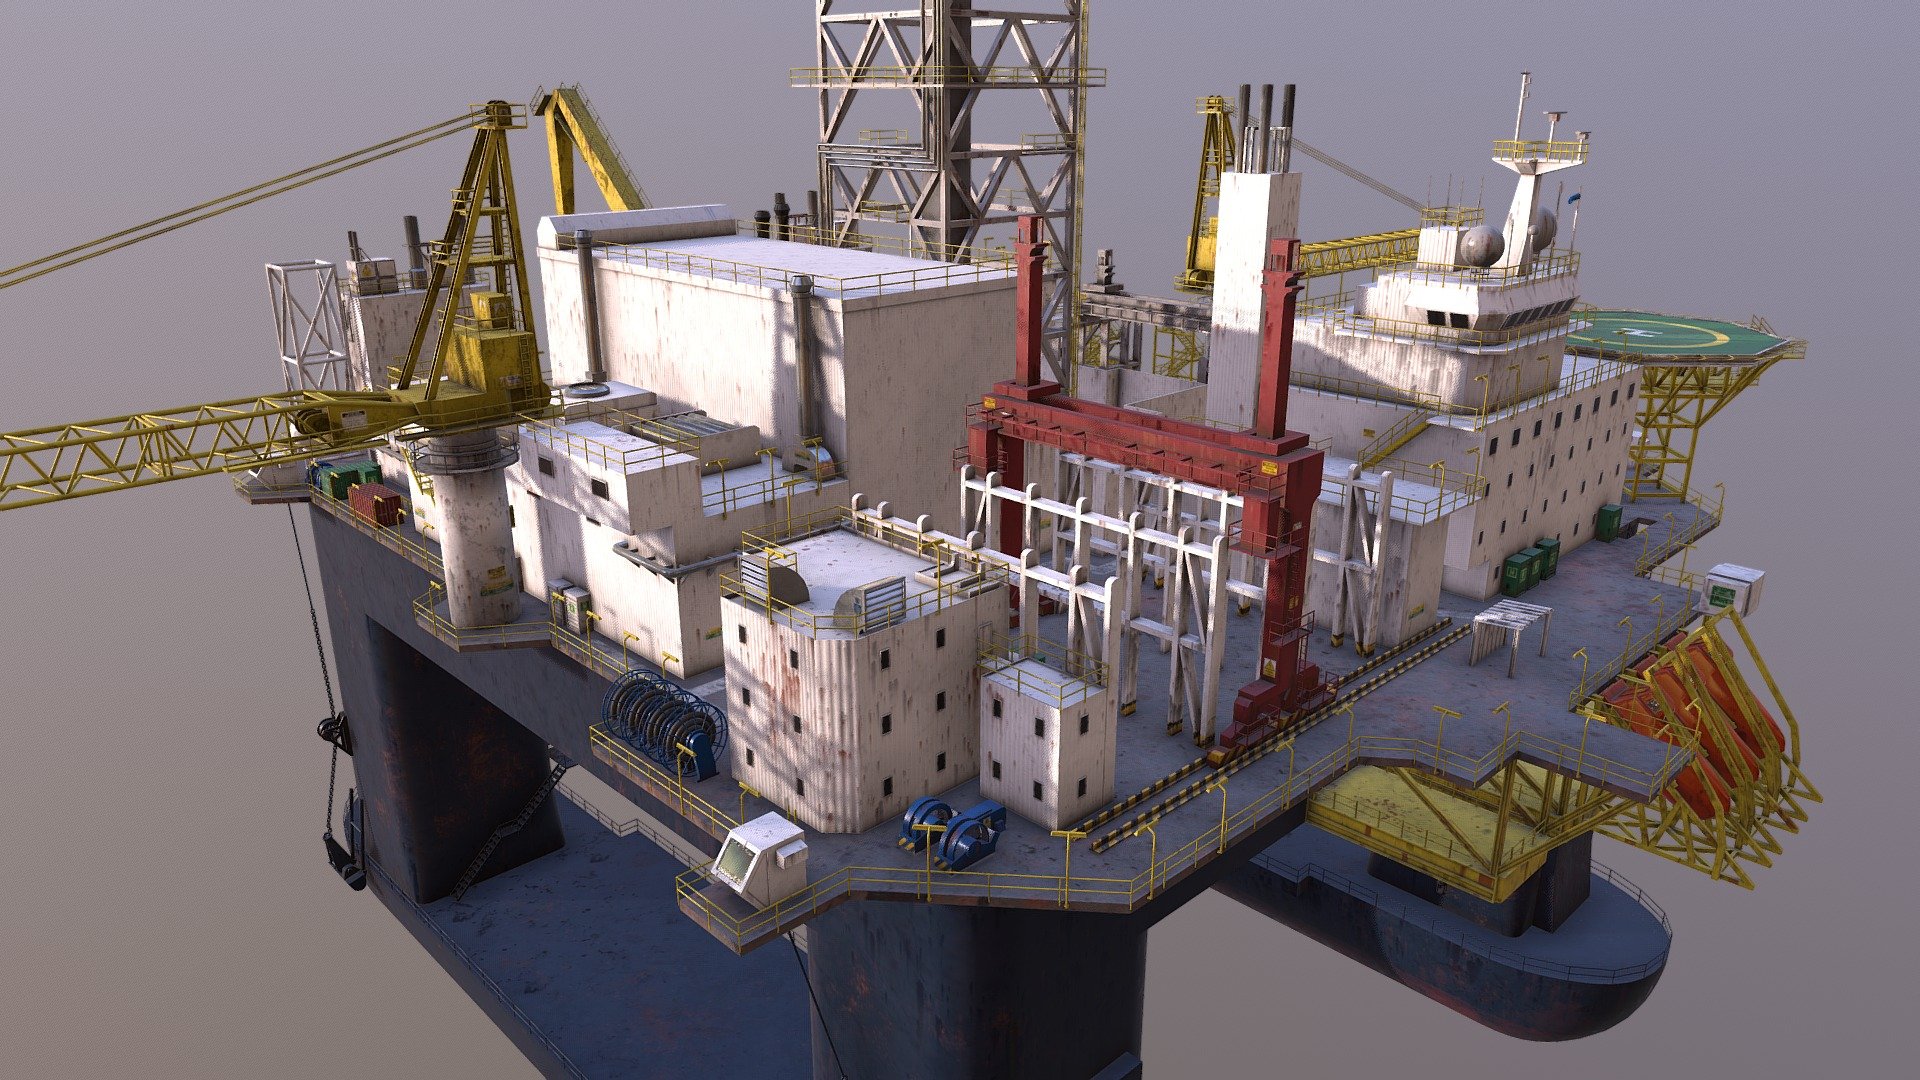 an updated version of my old oil rig model.
best part of a week unwrapping the UVWs, then 3-4 days texturing in Substance Painter.

I had to downsample the textures to 2k as there's 15 sets

U can find this model for sale on Turbosquid by searching for 1290748 (sorry, that's the closest I can get to giving a link without breaking sketchfab's ToS)

https://www.artstation.com/artwork/KlBPo - Oil Rig V2 - 3D model by 3dsam79 3d model